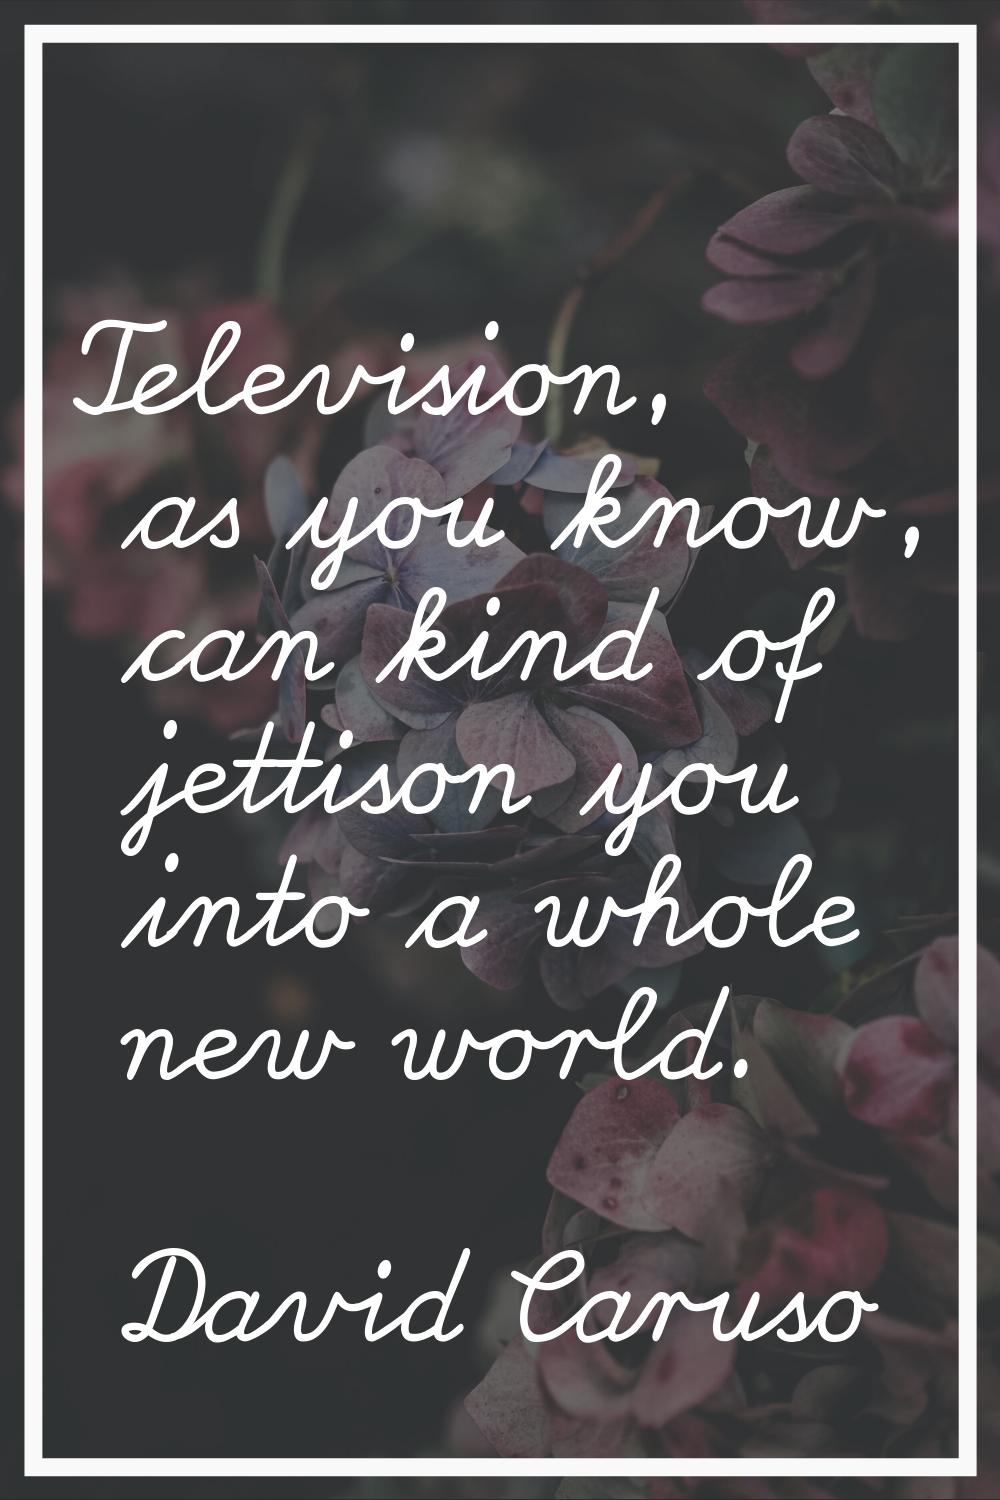 Television, as you know, can kind of jettison you into a whole new world.